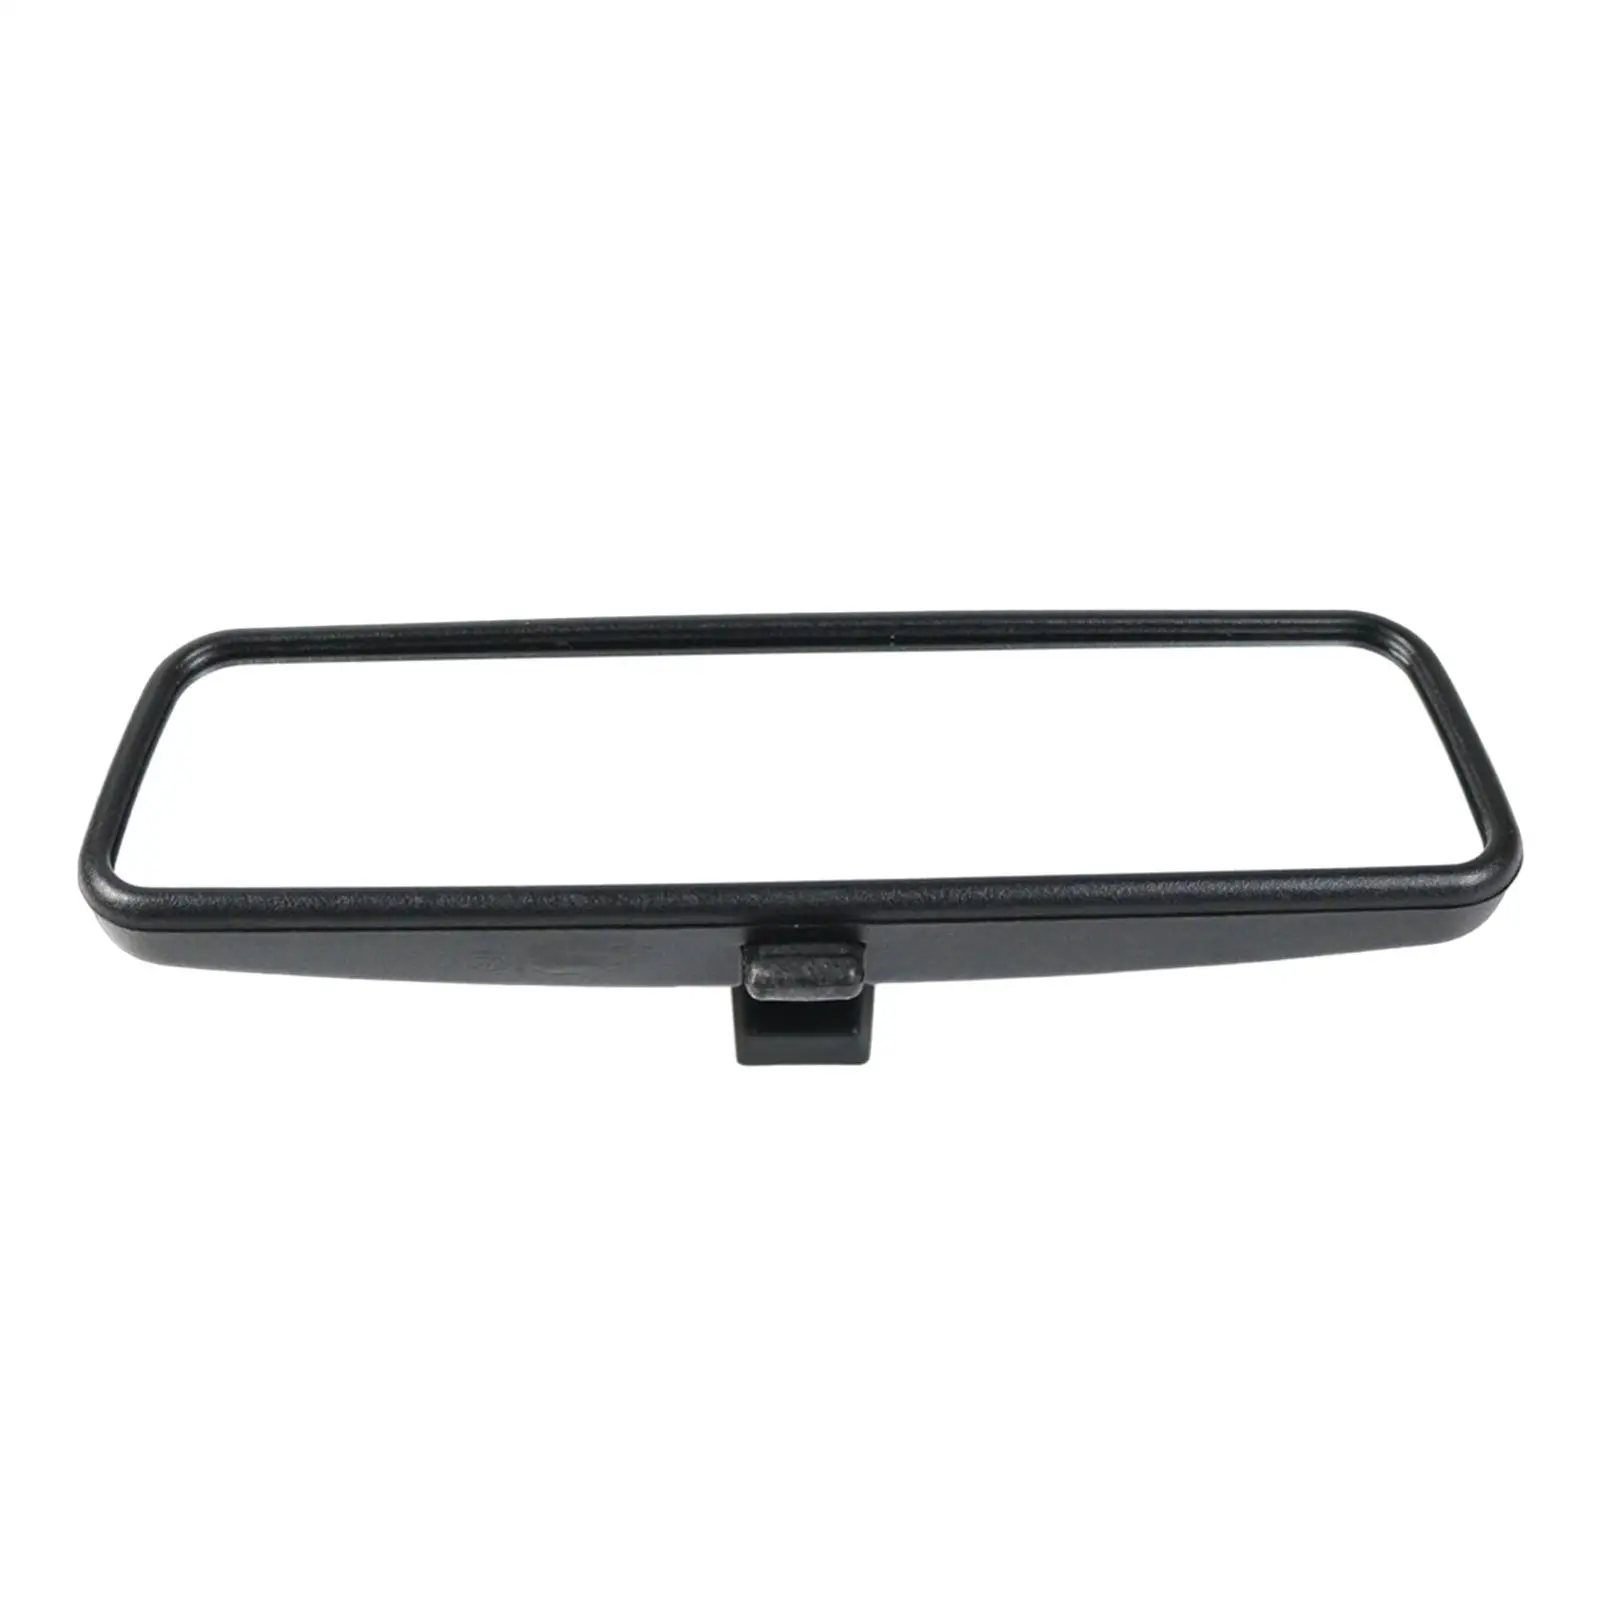 Interior Rear View Mirror 814842 Rearview Mirror for Citroen C1 Replaces